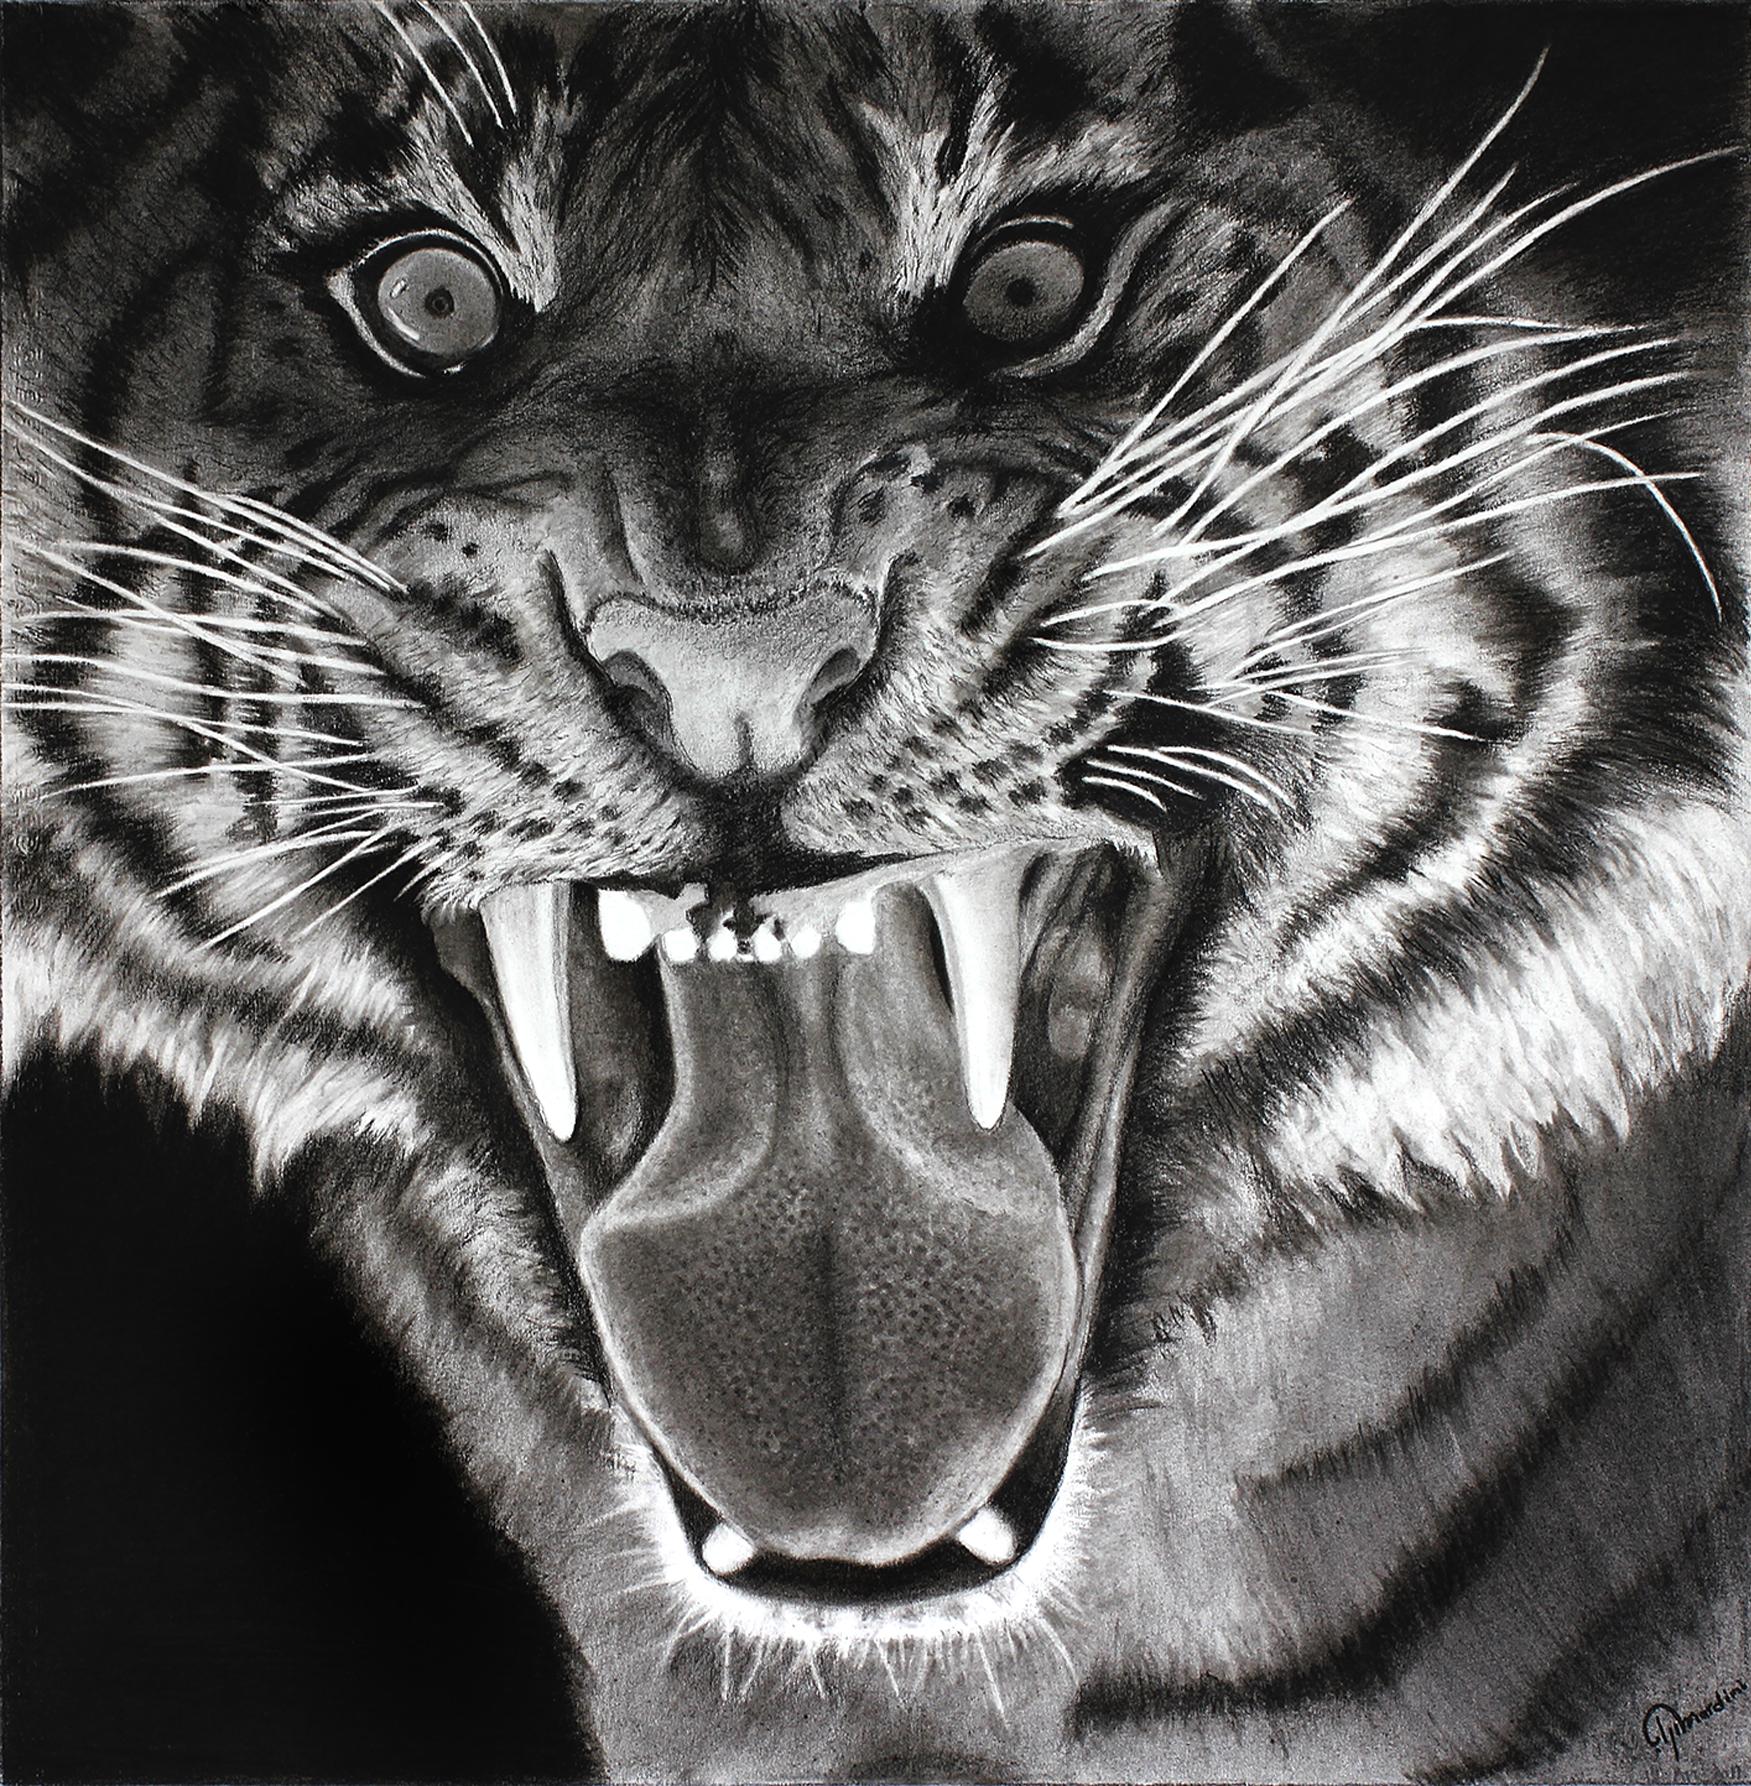 Year of the Tiger Pencil drawing by Modestas Mykolaitis | Artfinder